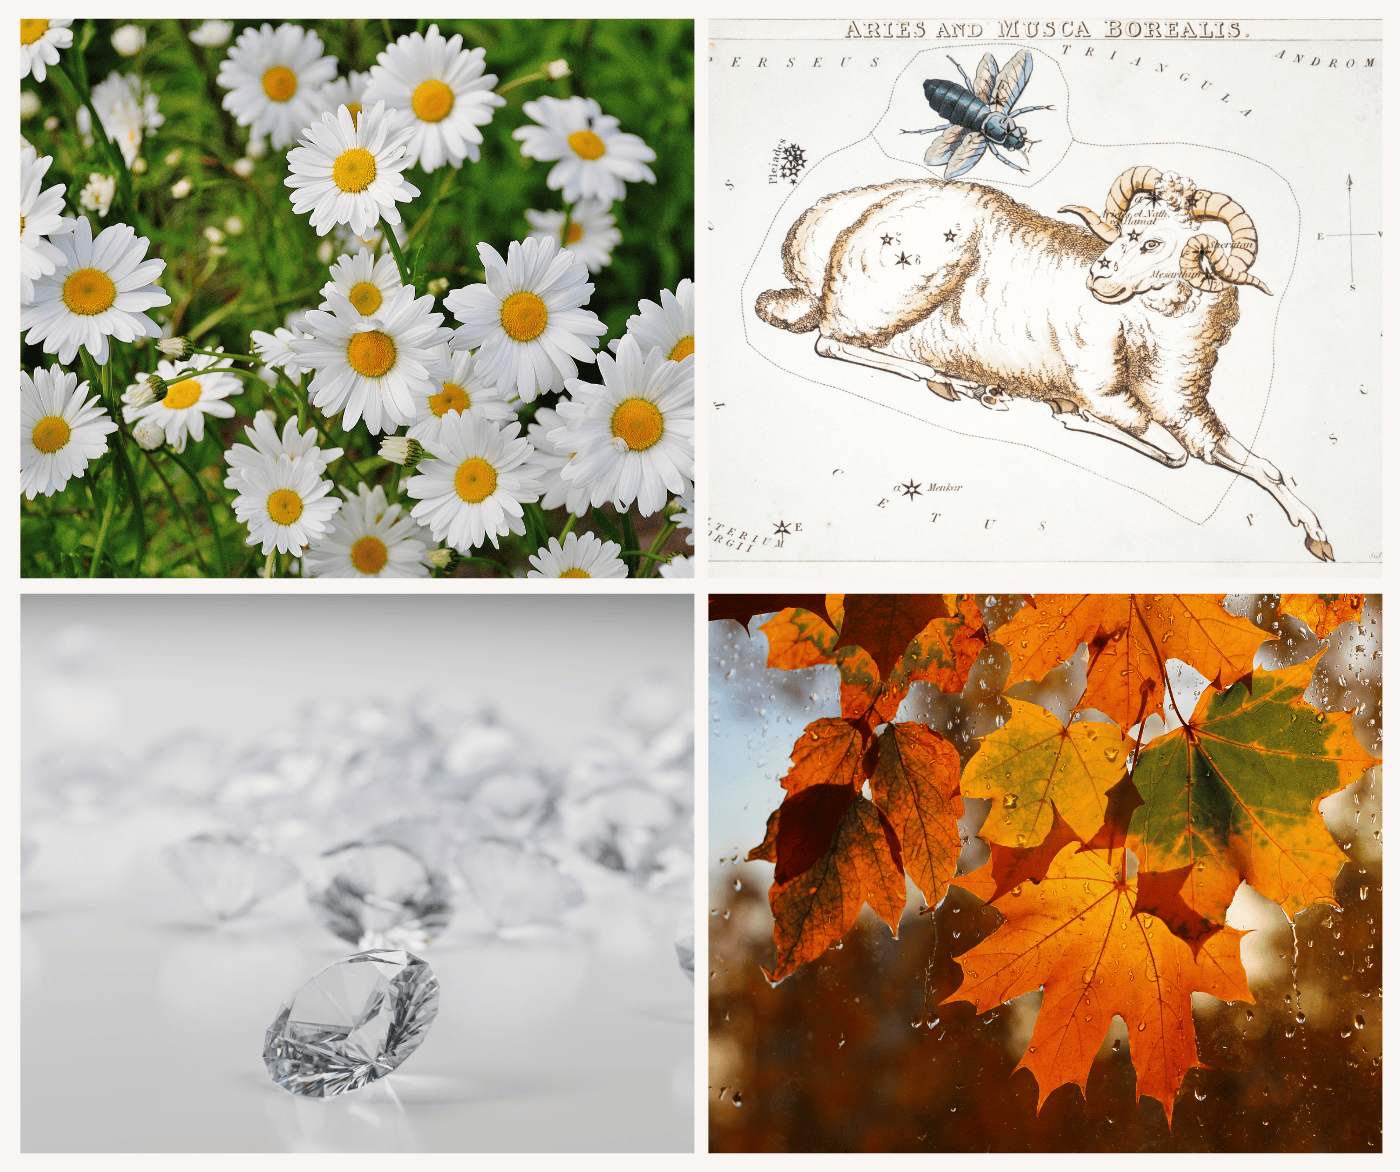 Four images of symbols of April, including daisy flower, the ram of the Aries zodiac, some diamonds, and the leaf of the maple tree